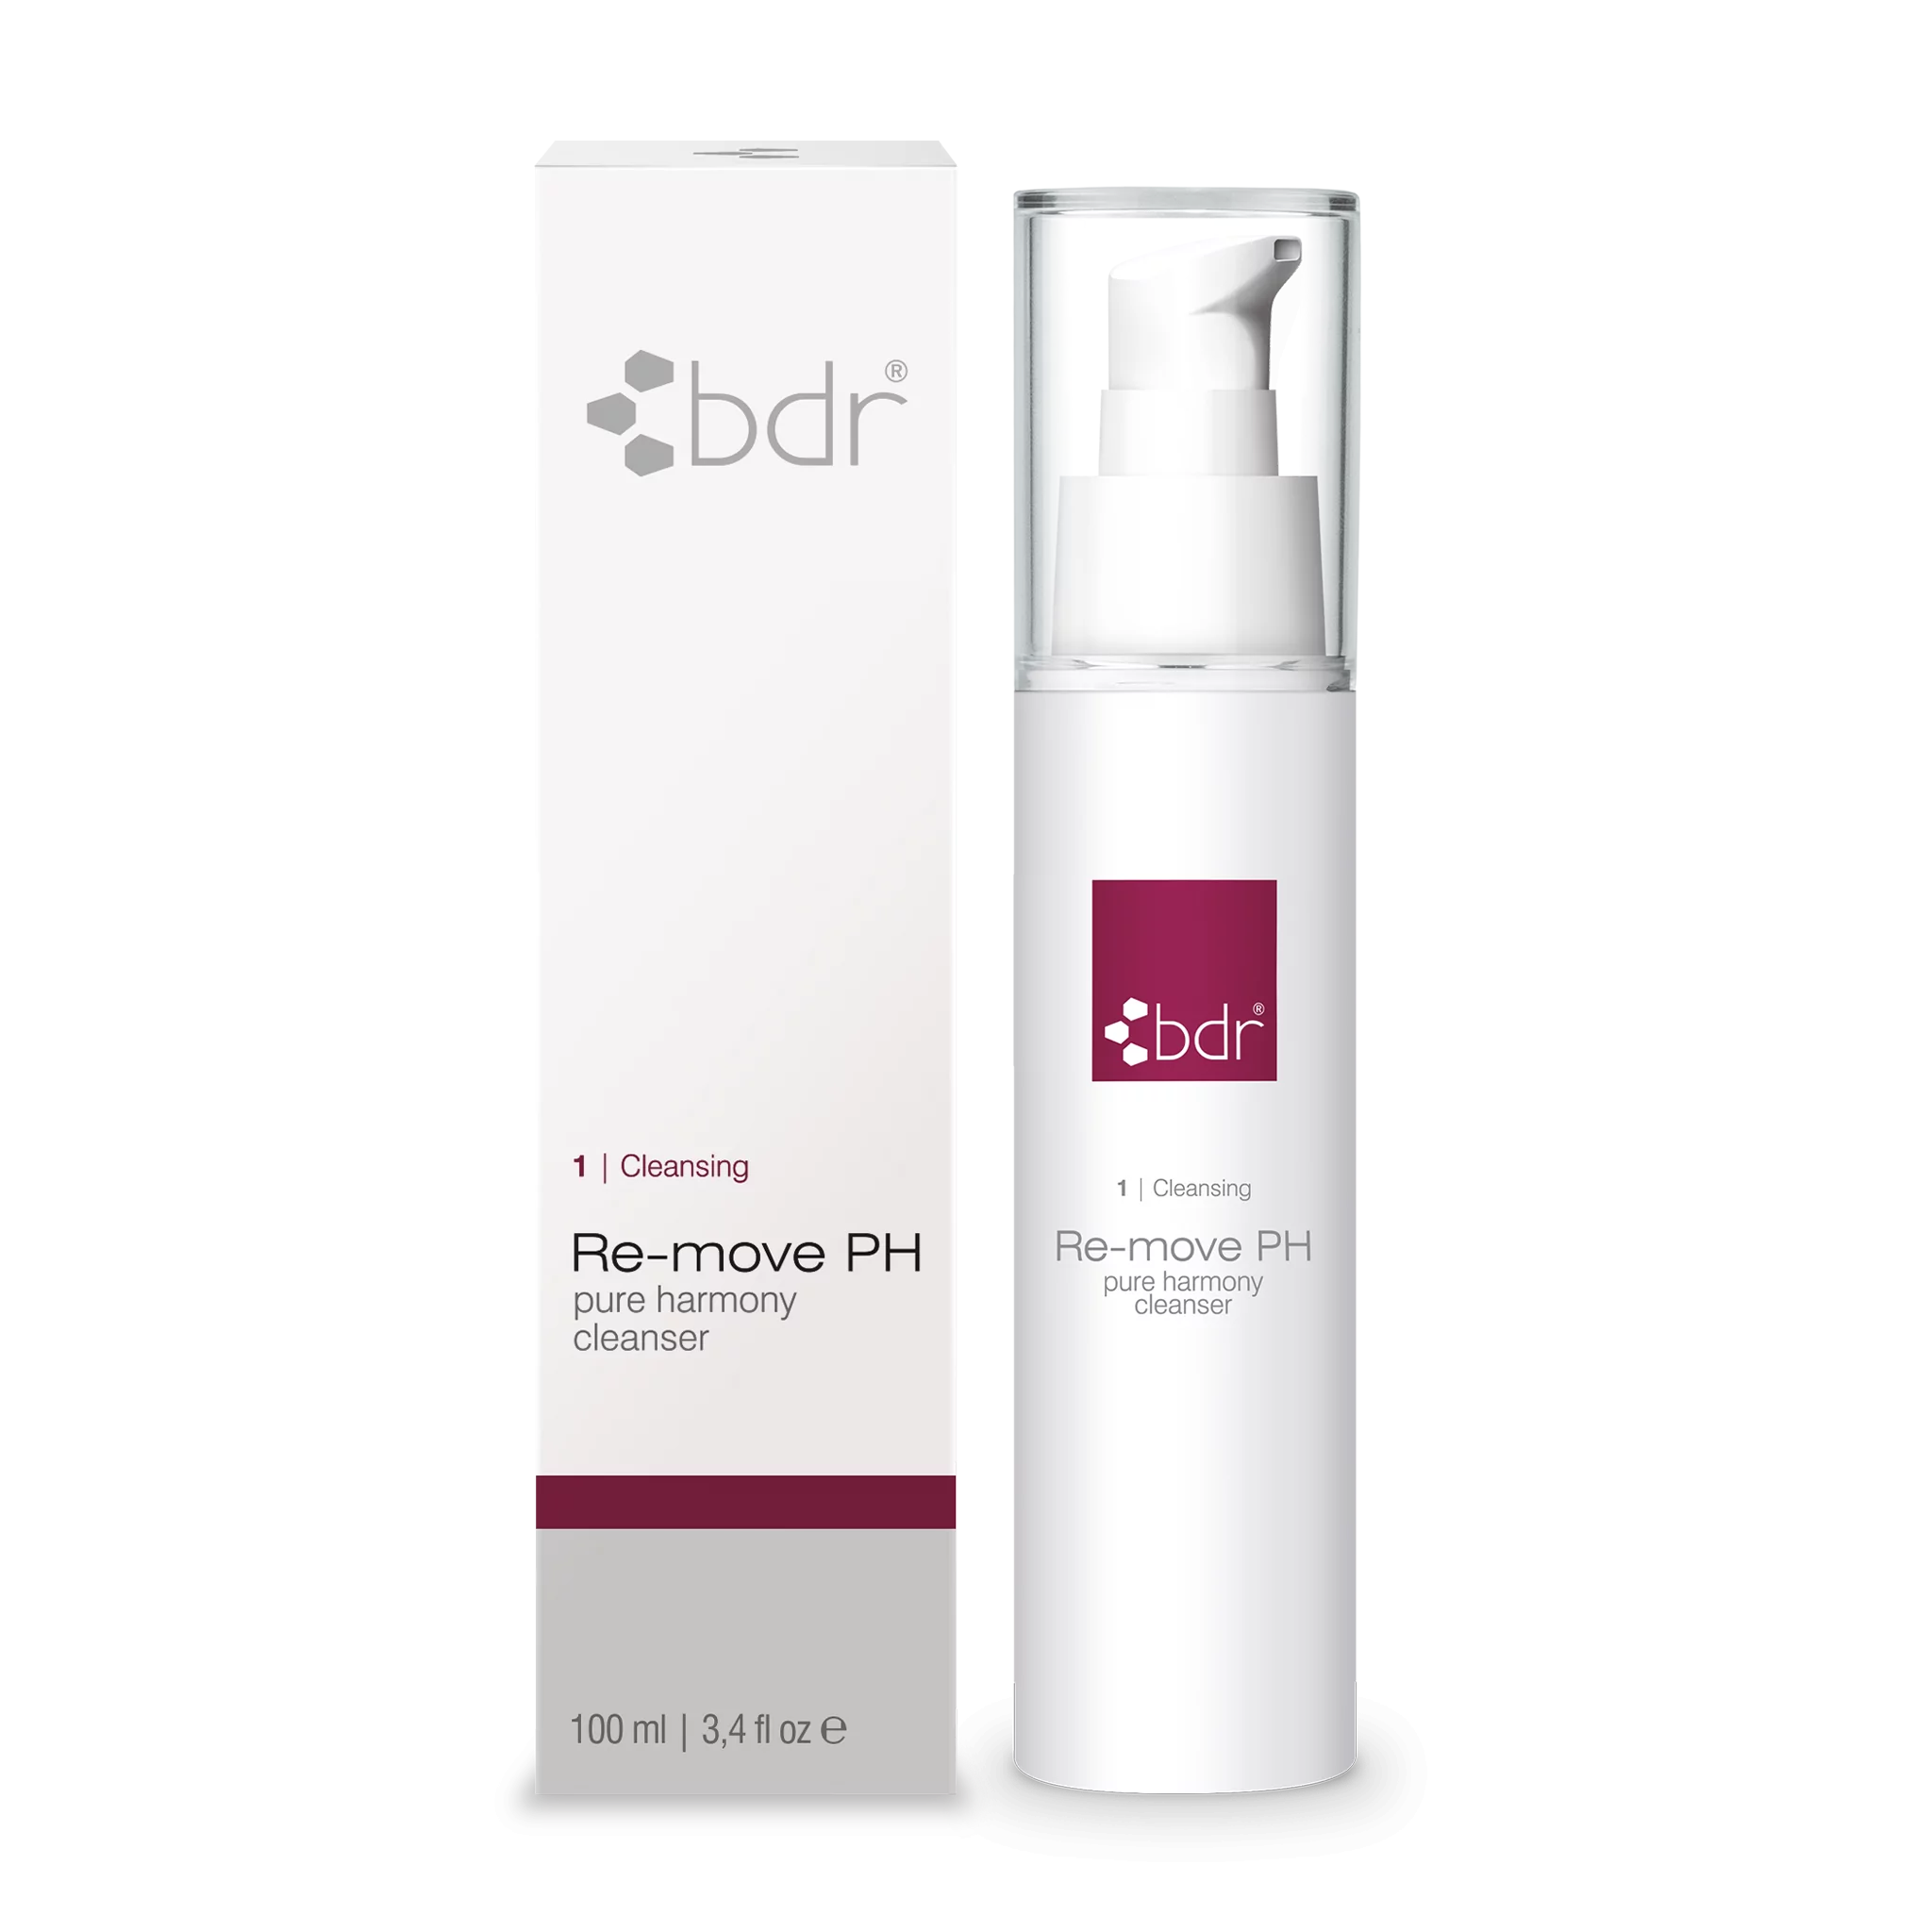 Re-move pure harmony cleanser